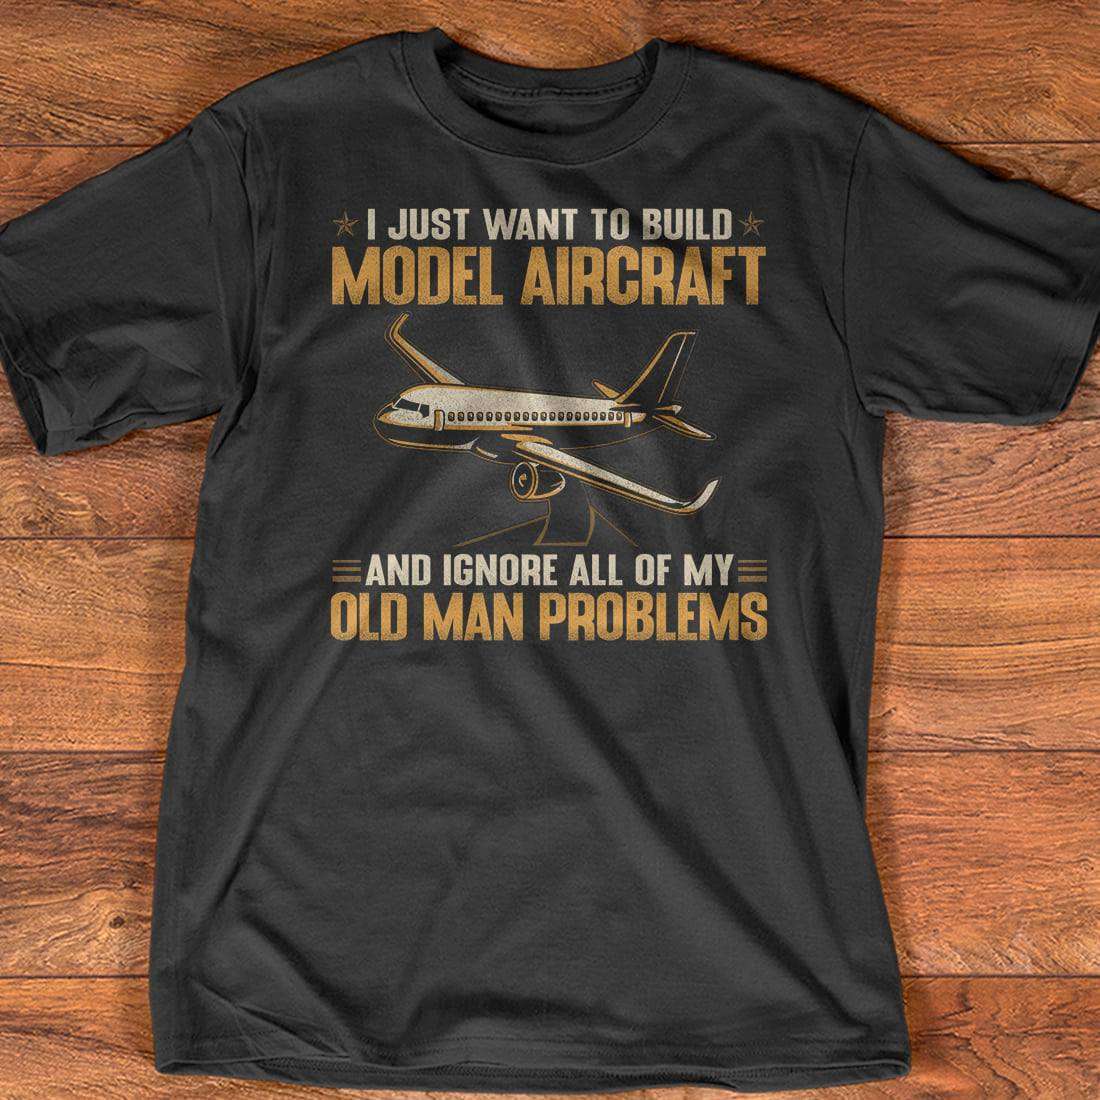 I just want to build model aircraft and ignore all of my old man problems